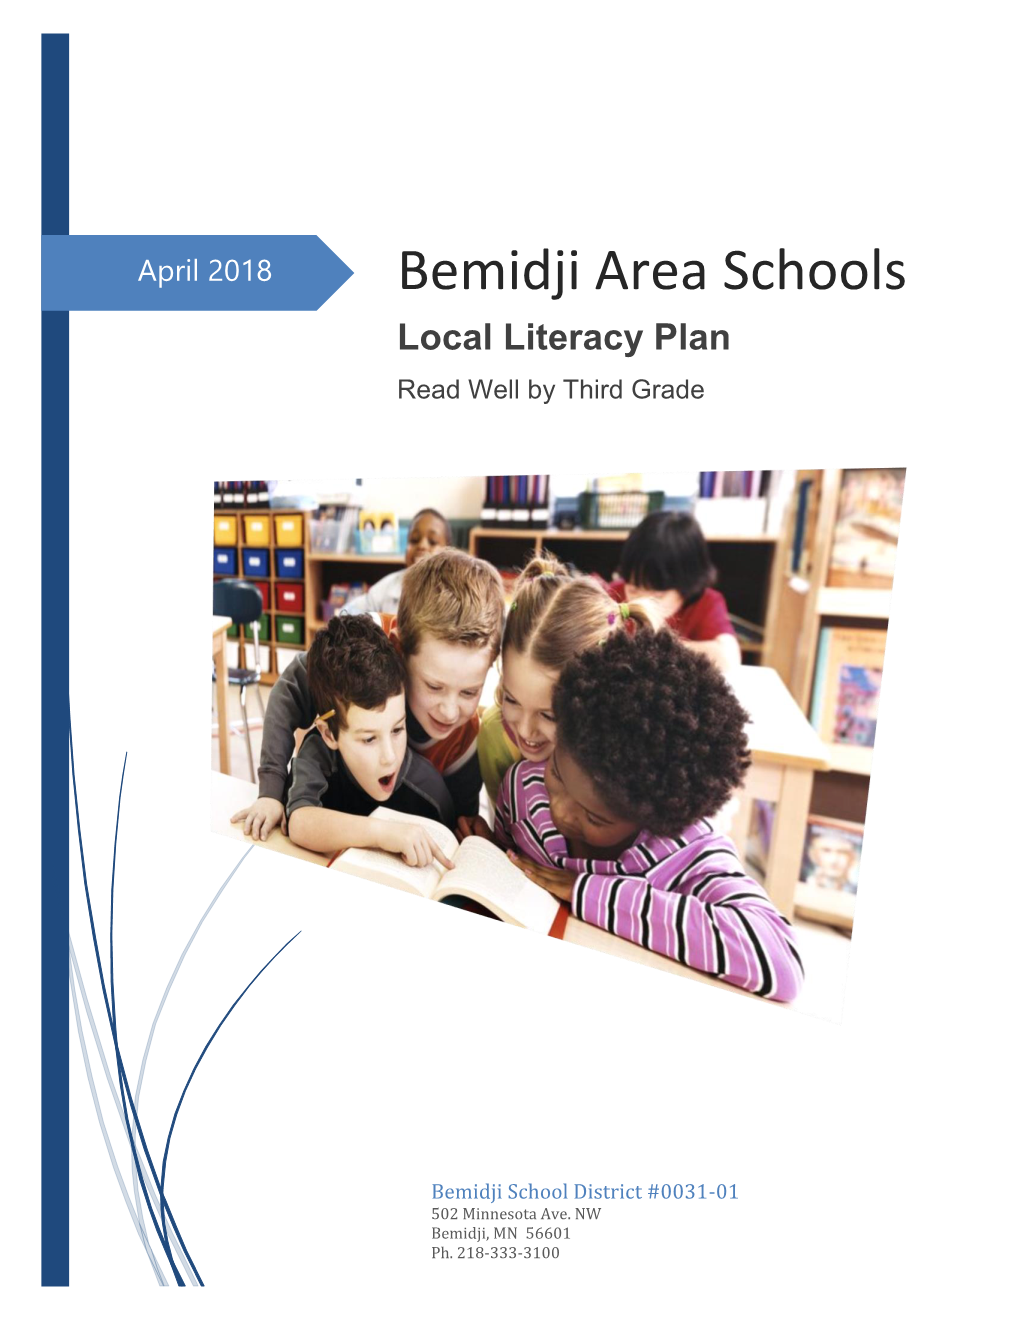 Local Literacy Plan Read Well by Third Grade